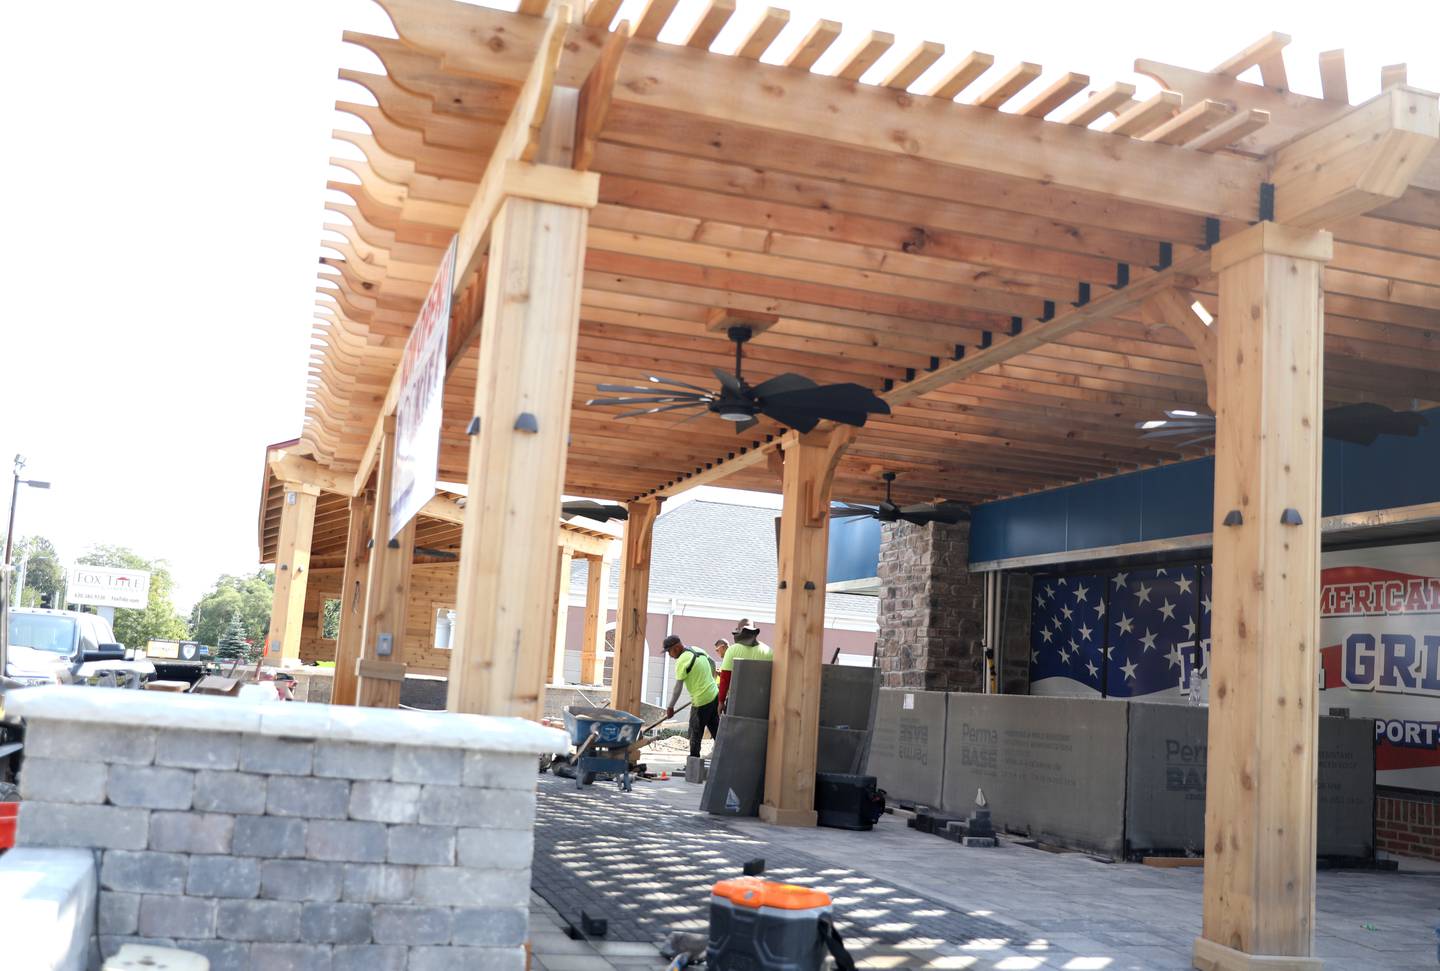 Extensive improvements have been made to the original Rookies Sports Bar and Grill in St. Charles, which is owned by the Karas Restaurant Group. Exterior improvements including a pergola, stage, outdoor bar and seating for up to 100 are still underway.